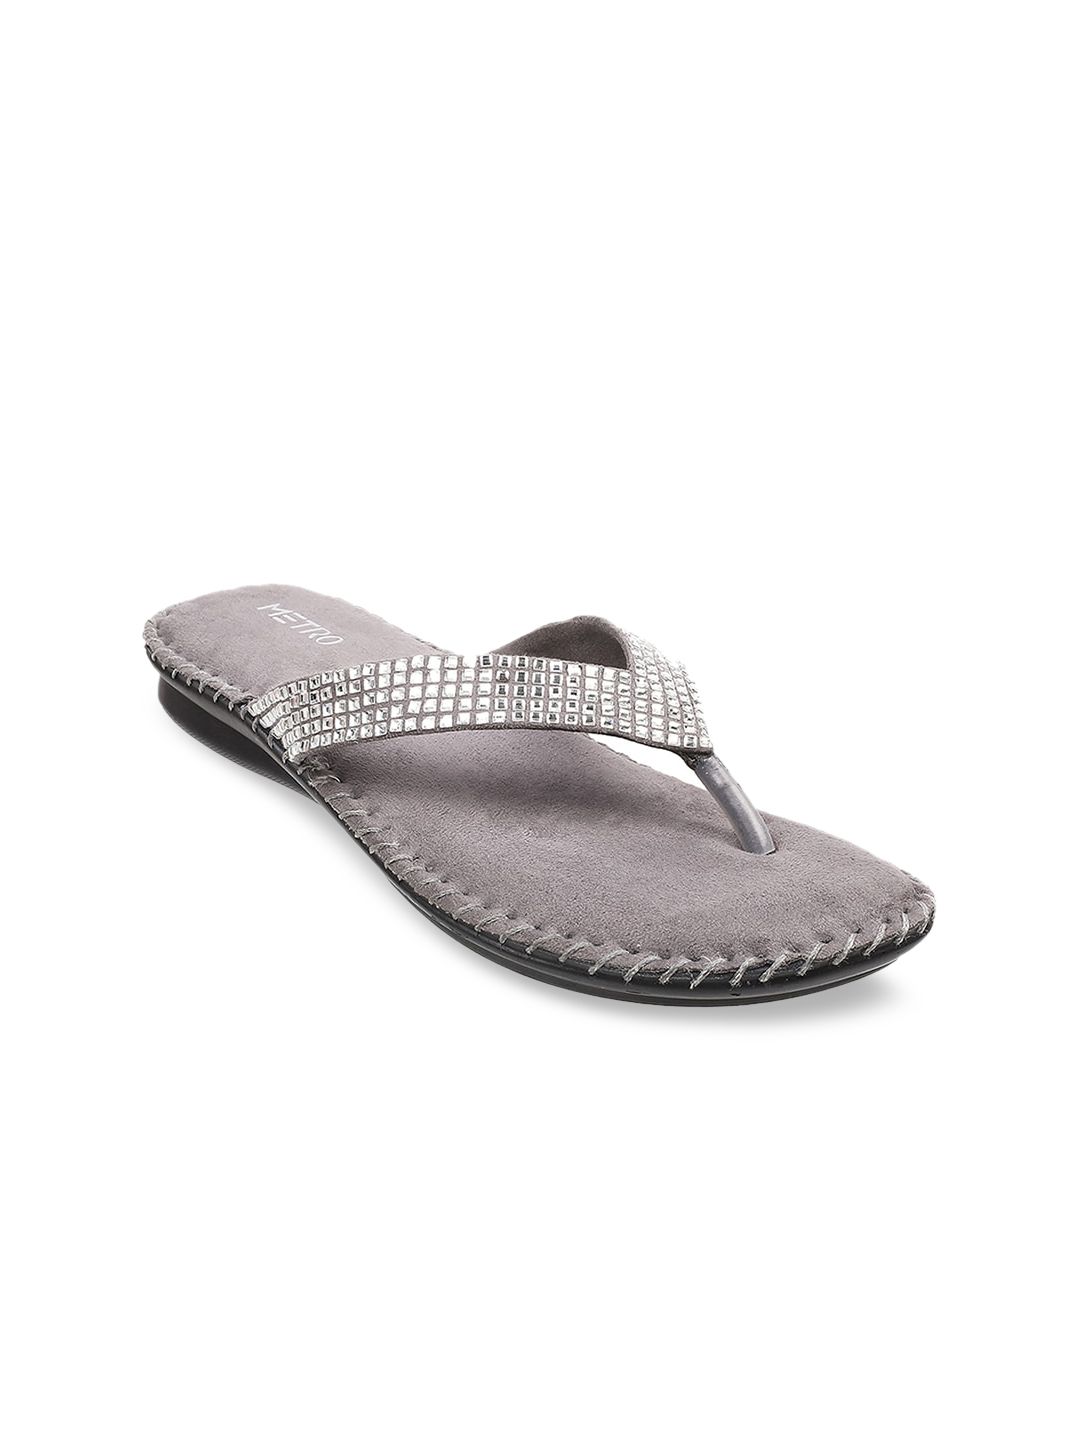 Metro Women Grey Embellished T-Strap Flats Price in India